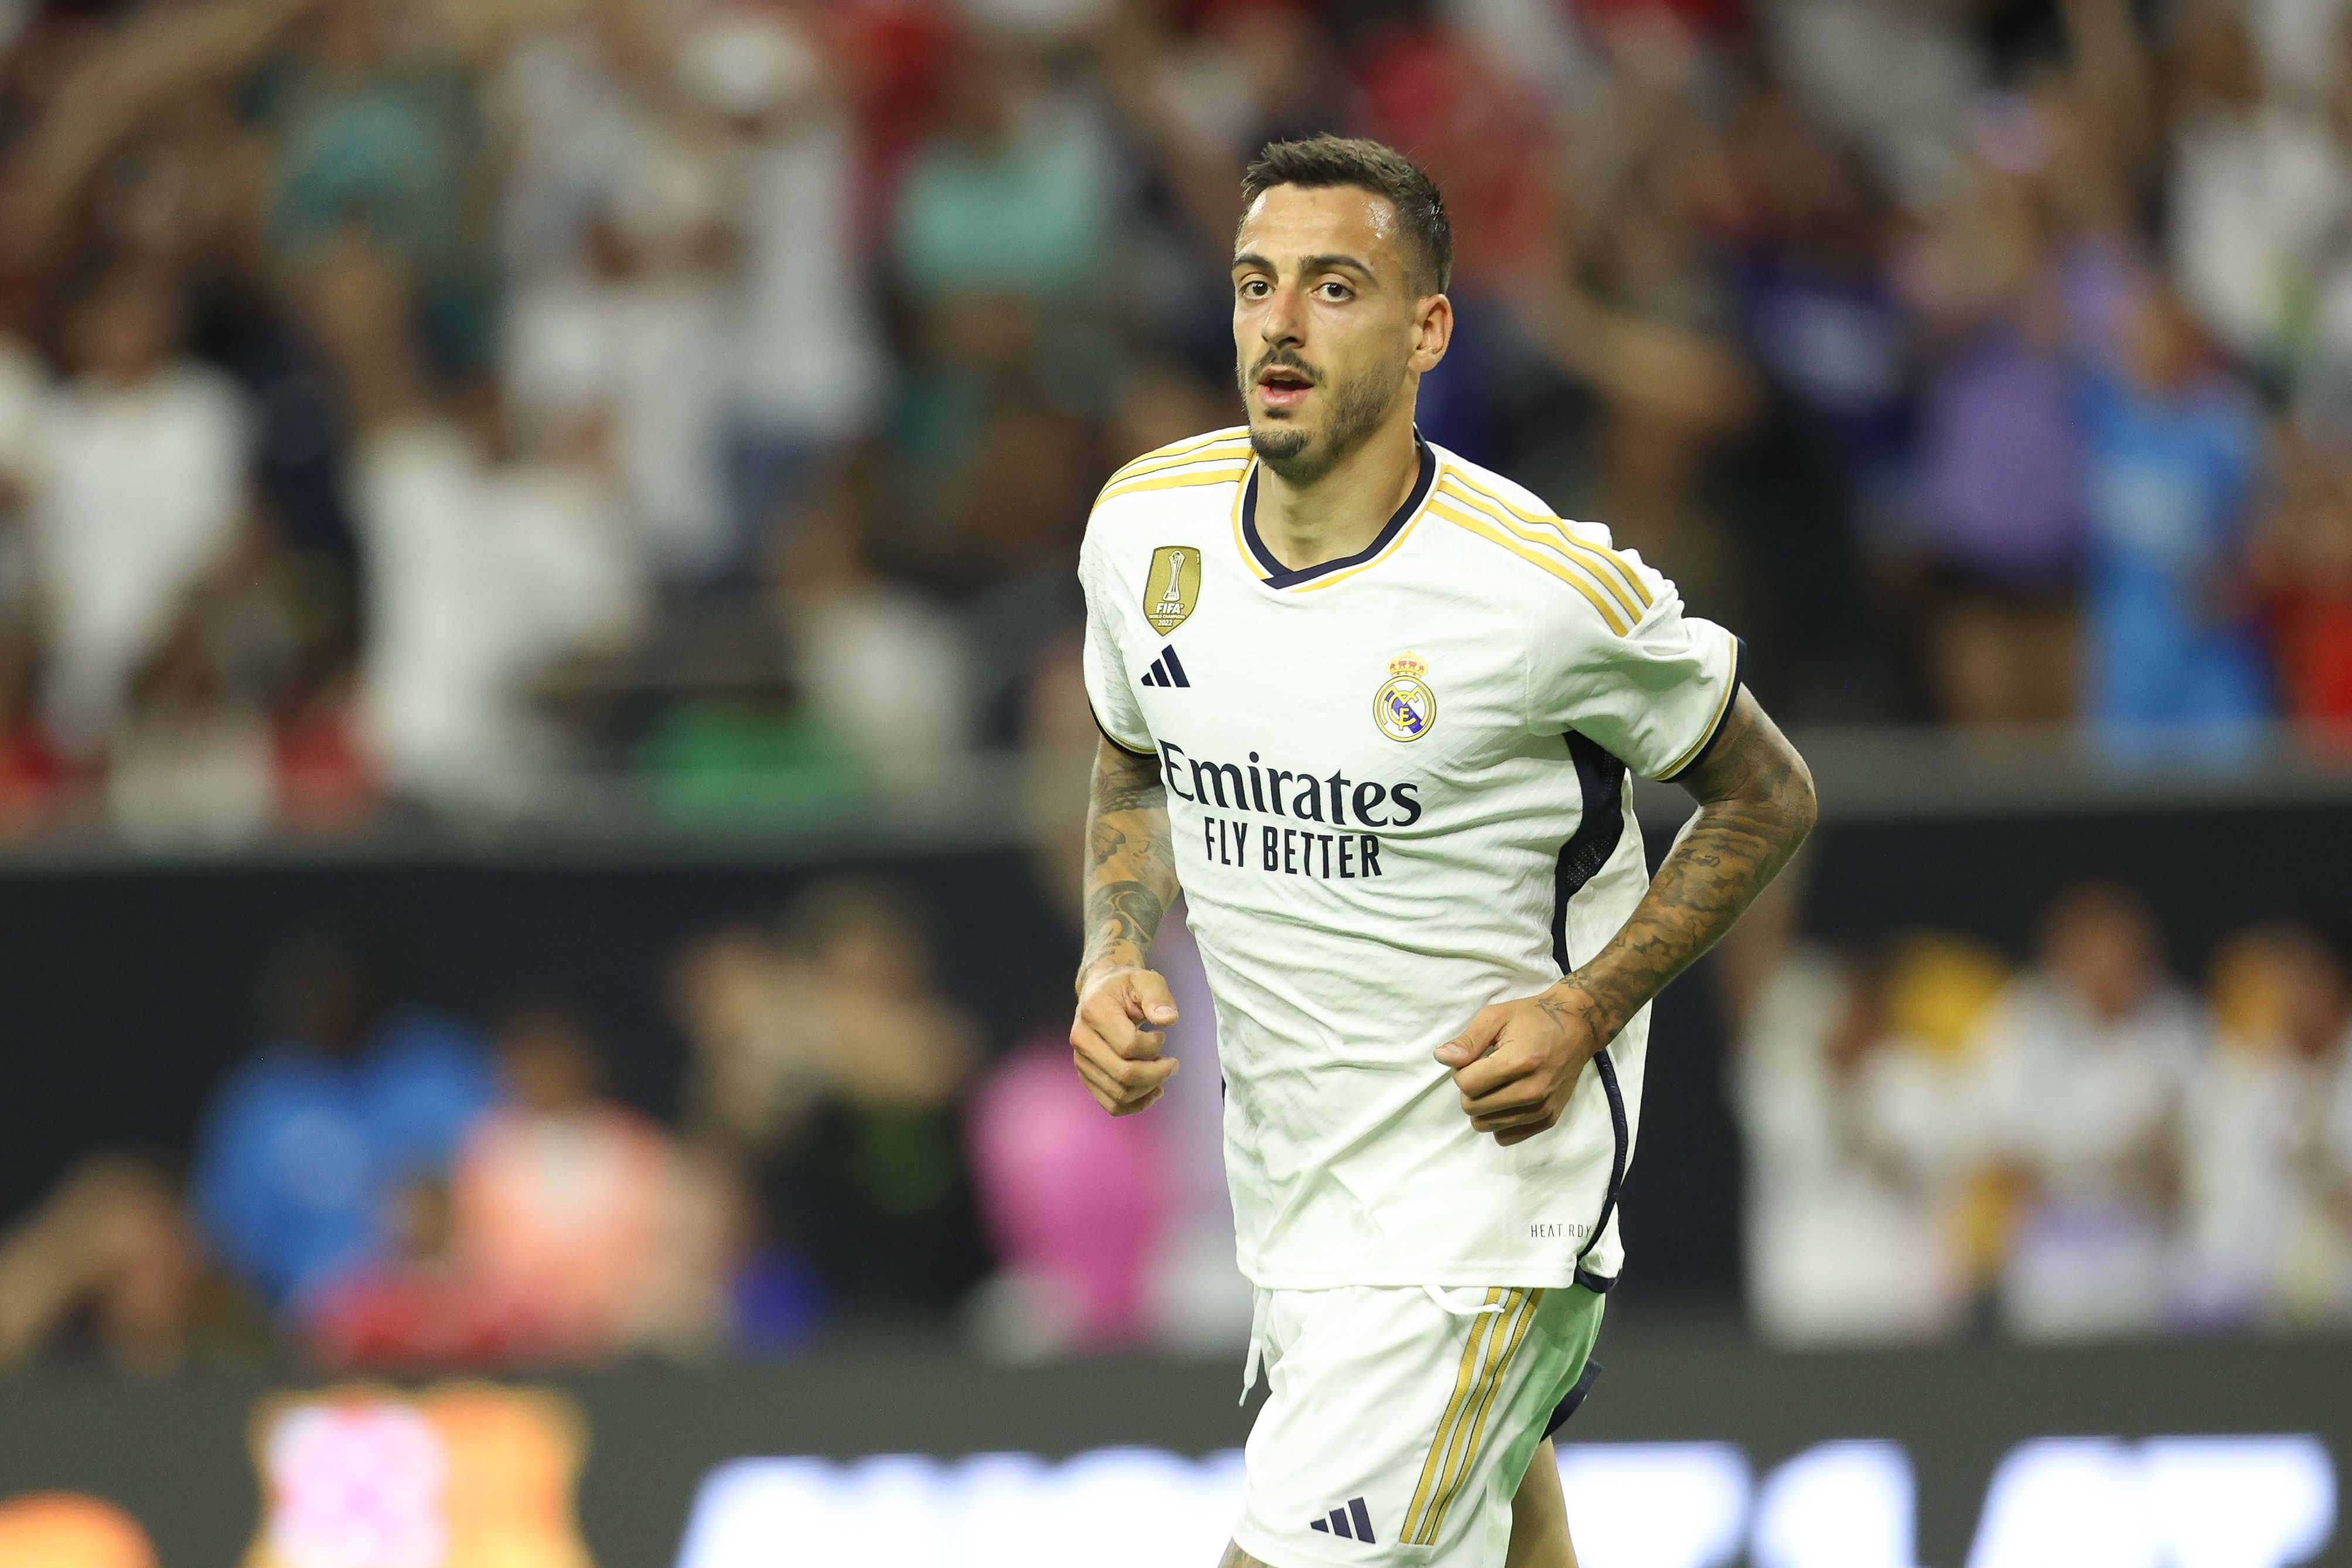 Joselu #14 of Real Madrid celebrates after scoring the second goal of his team during a friendly match between Real Madrid and Manchester United.